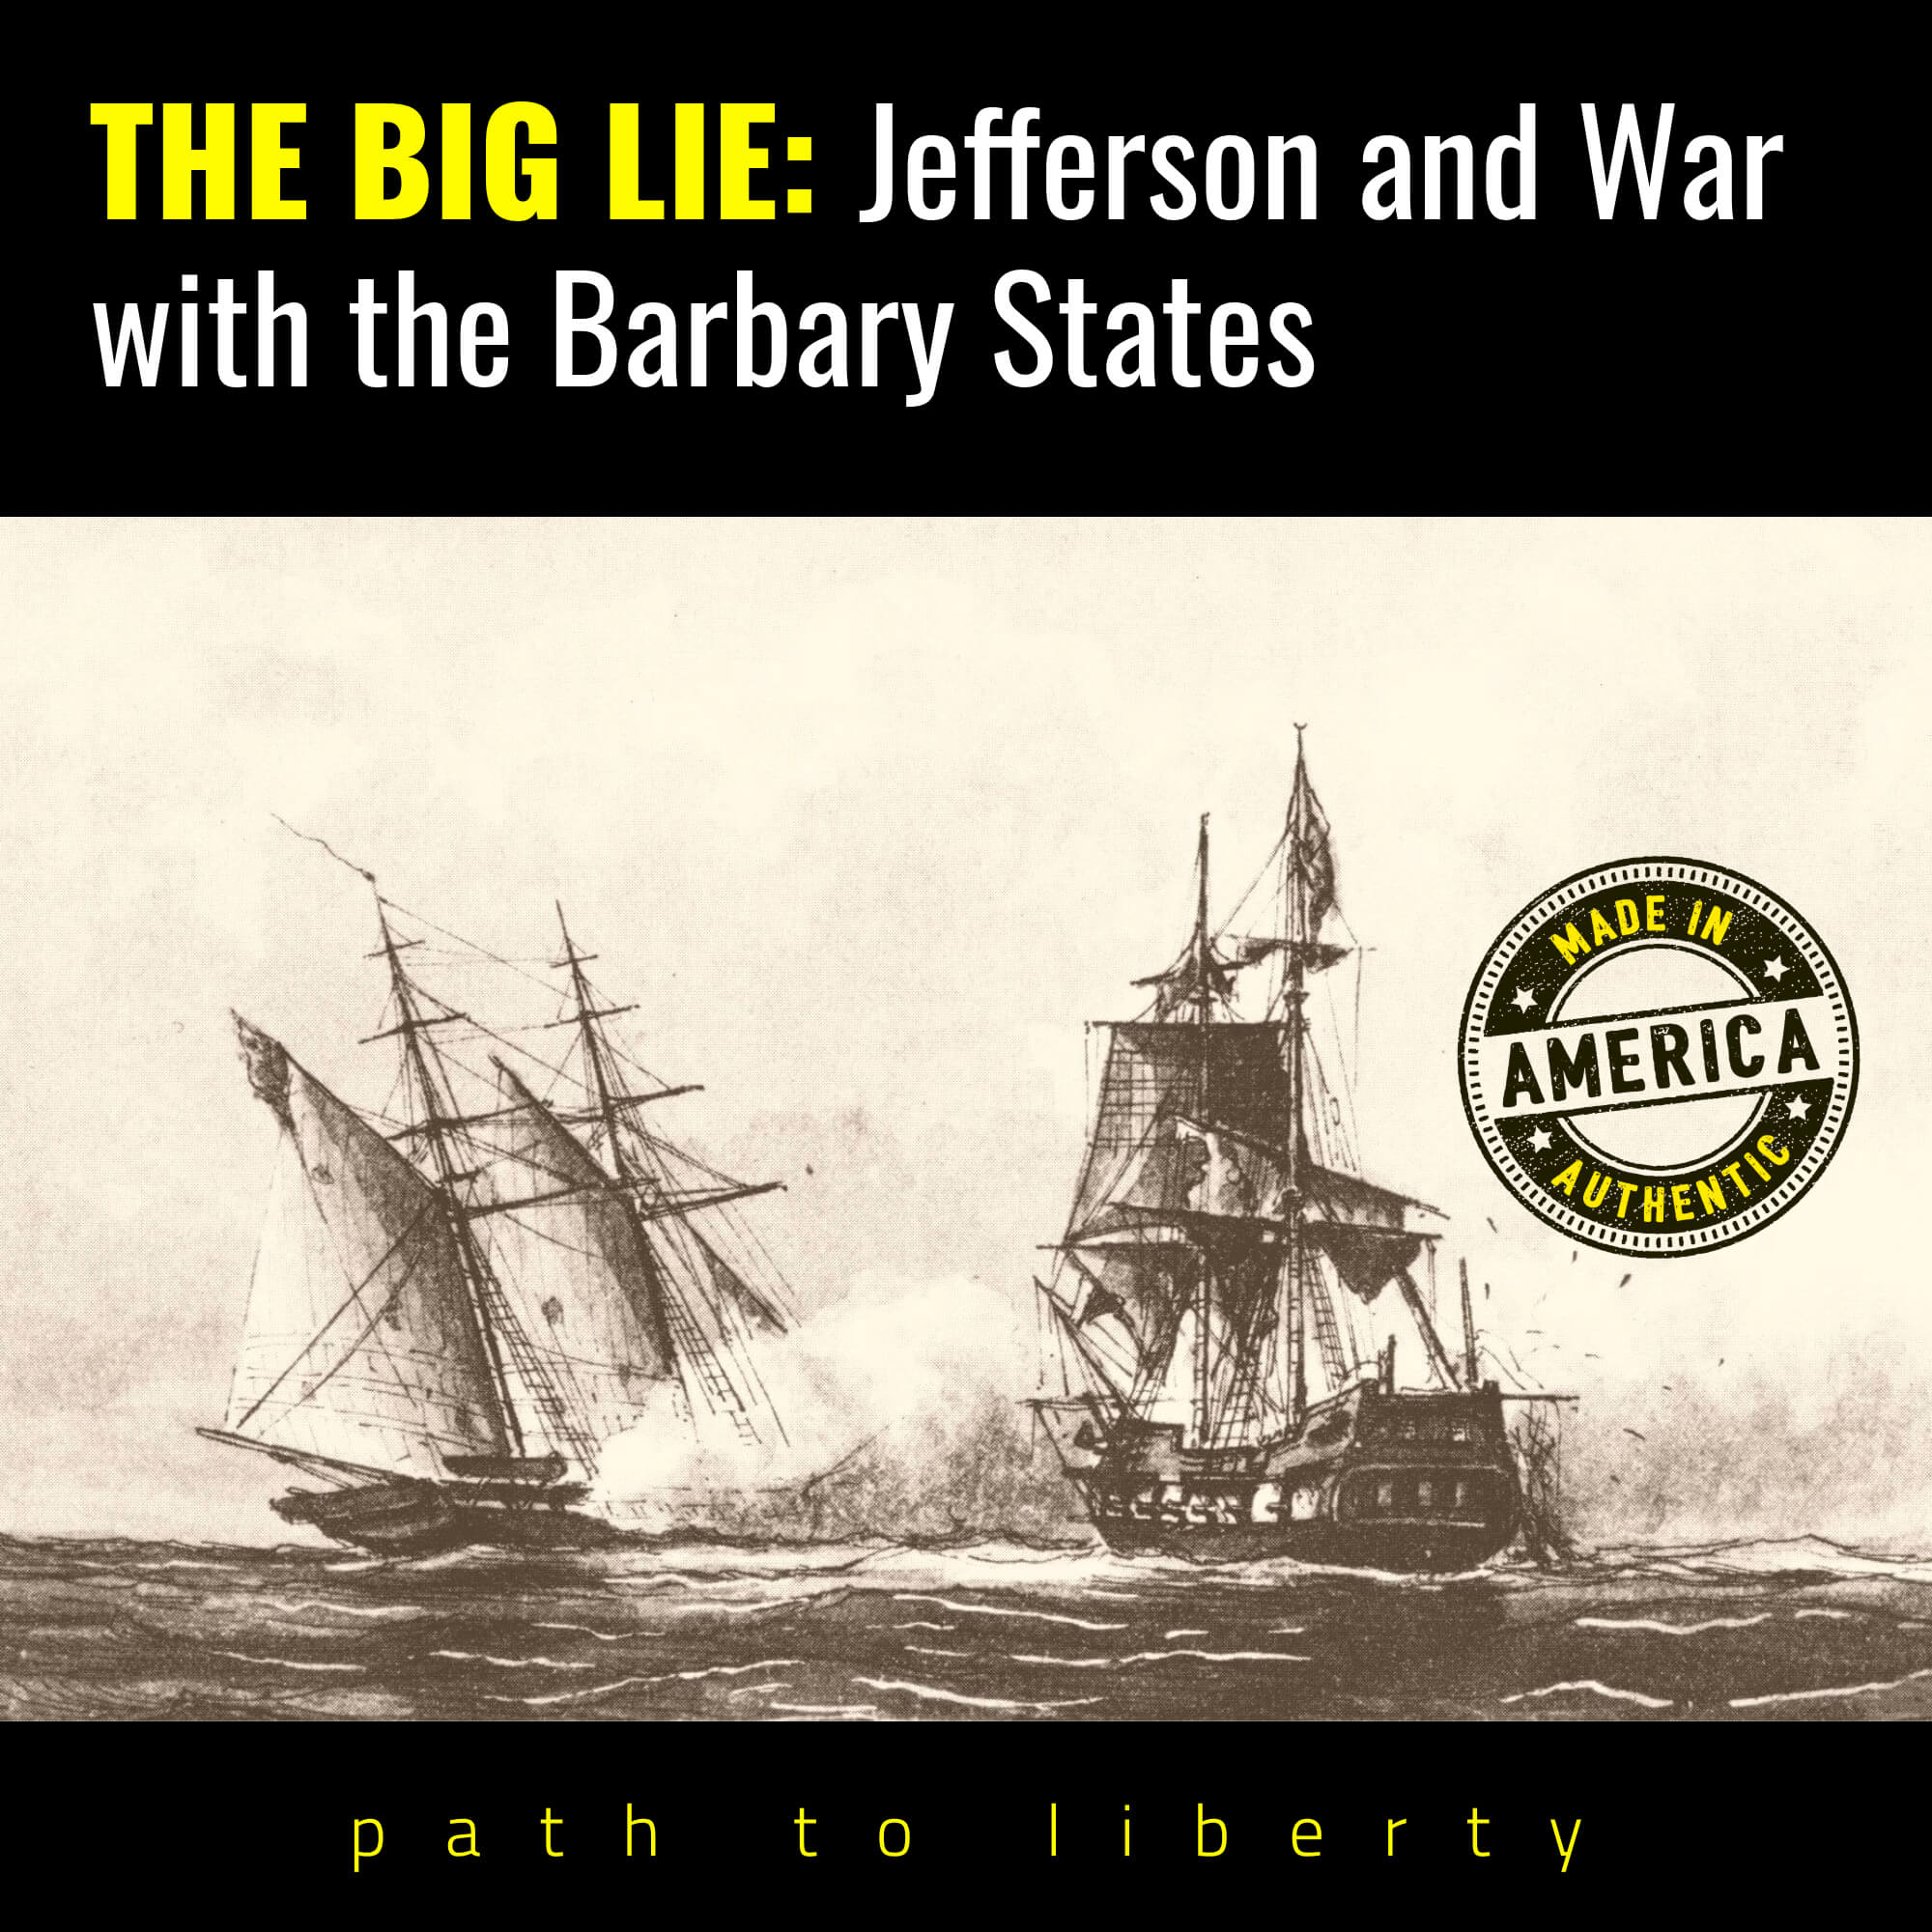 The Big Lie: Jefferson and War with the Barbary States